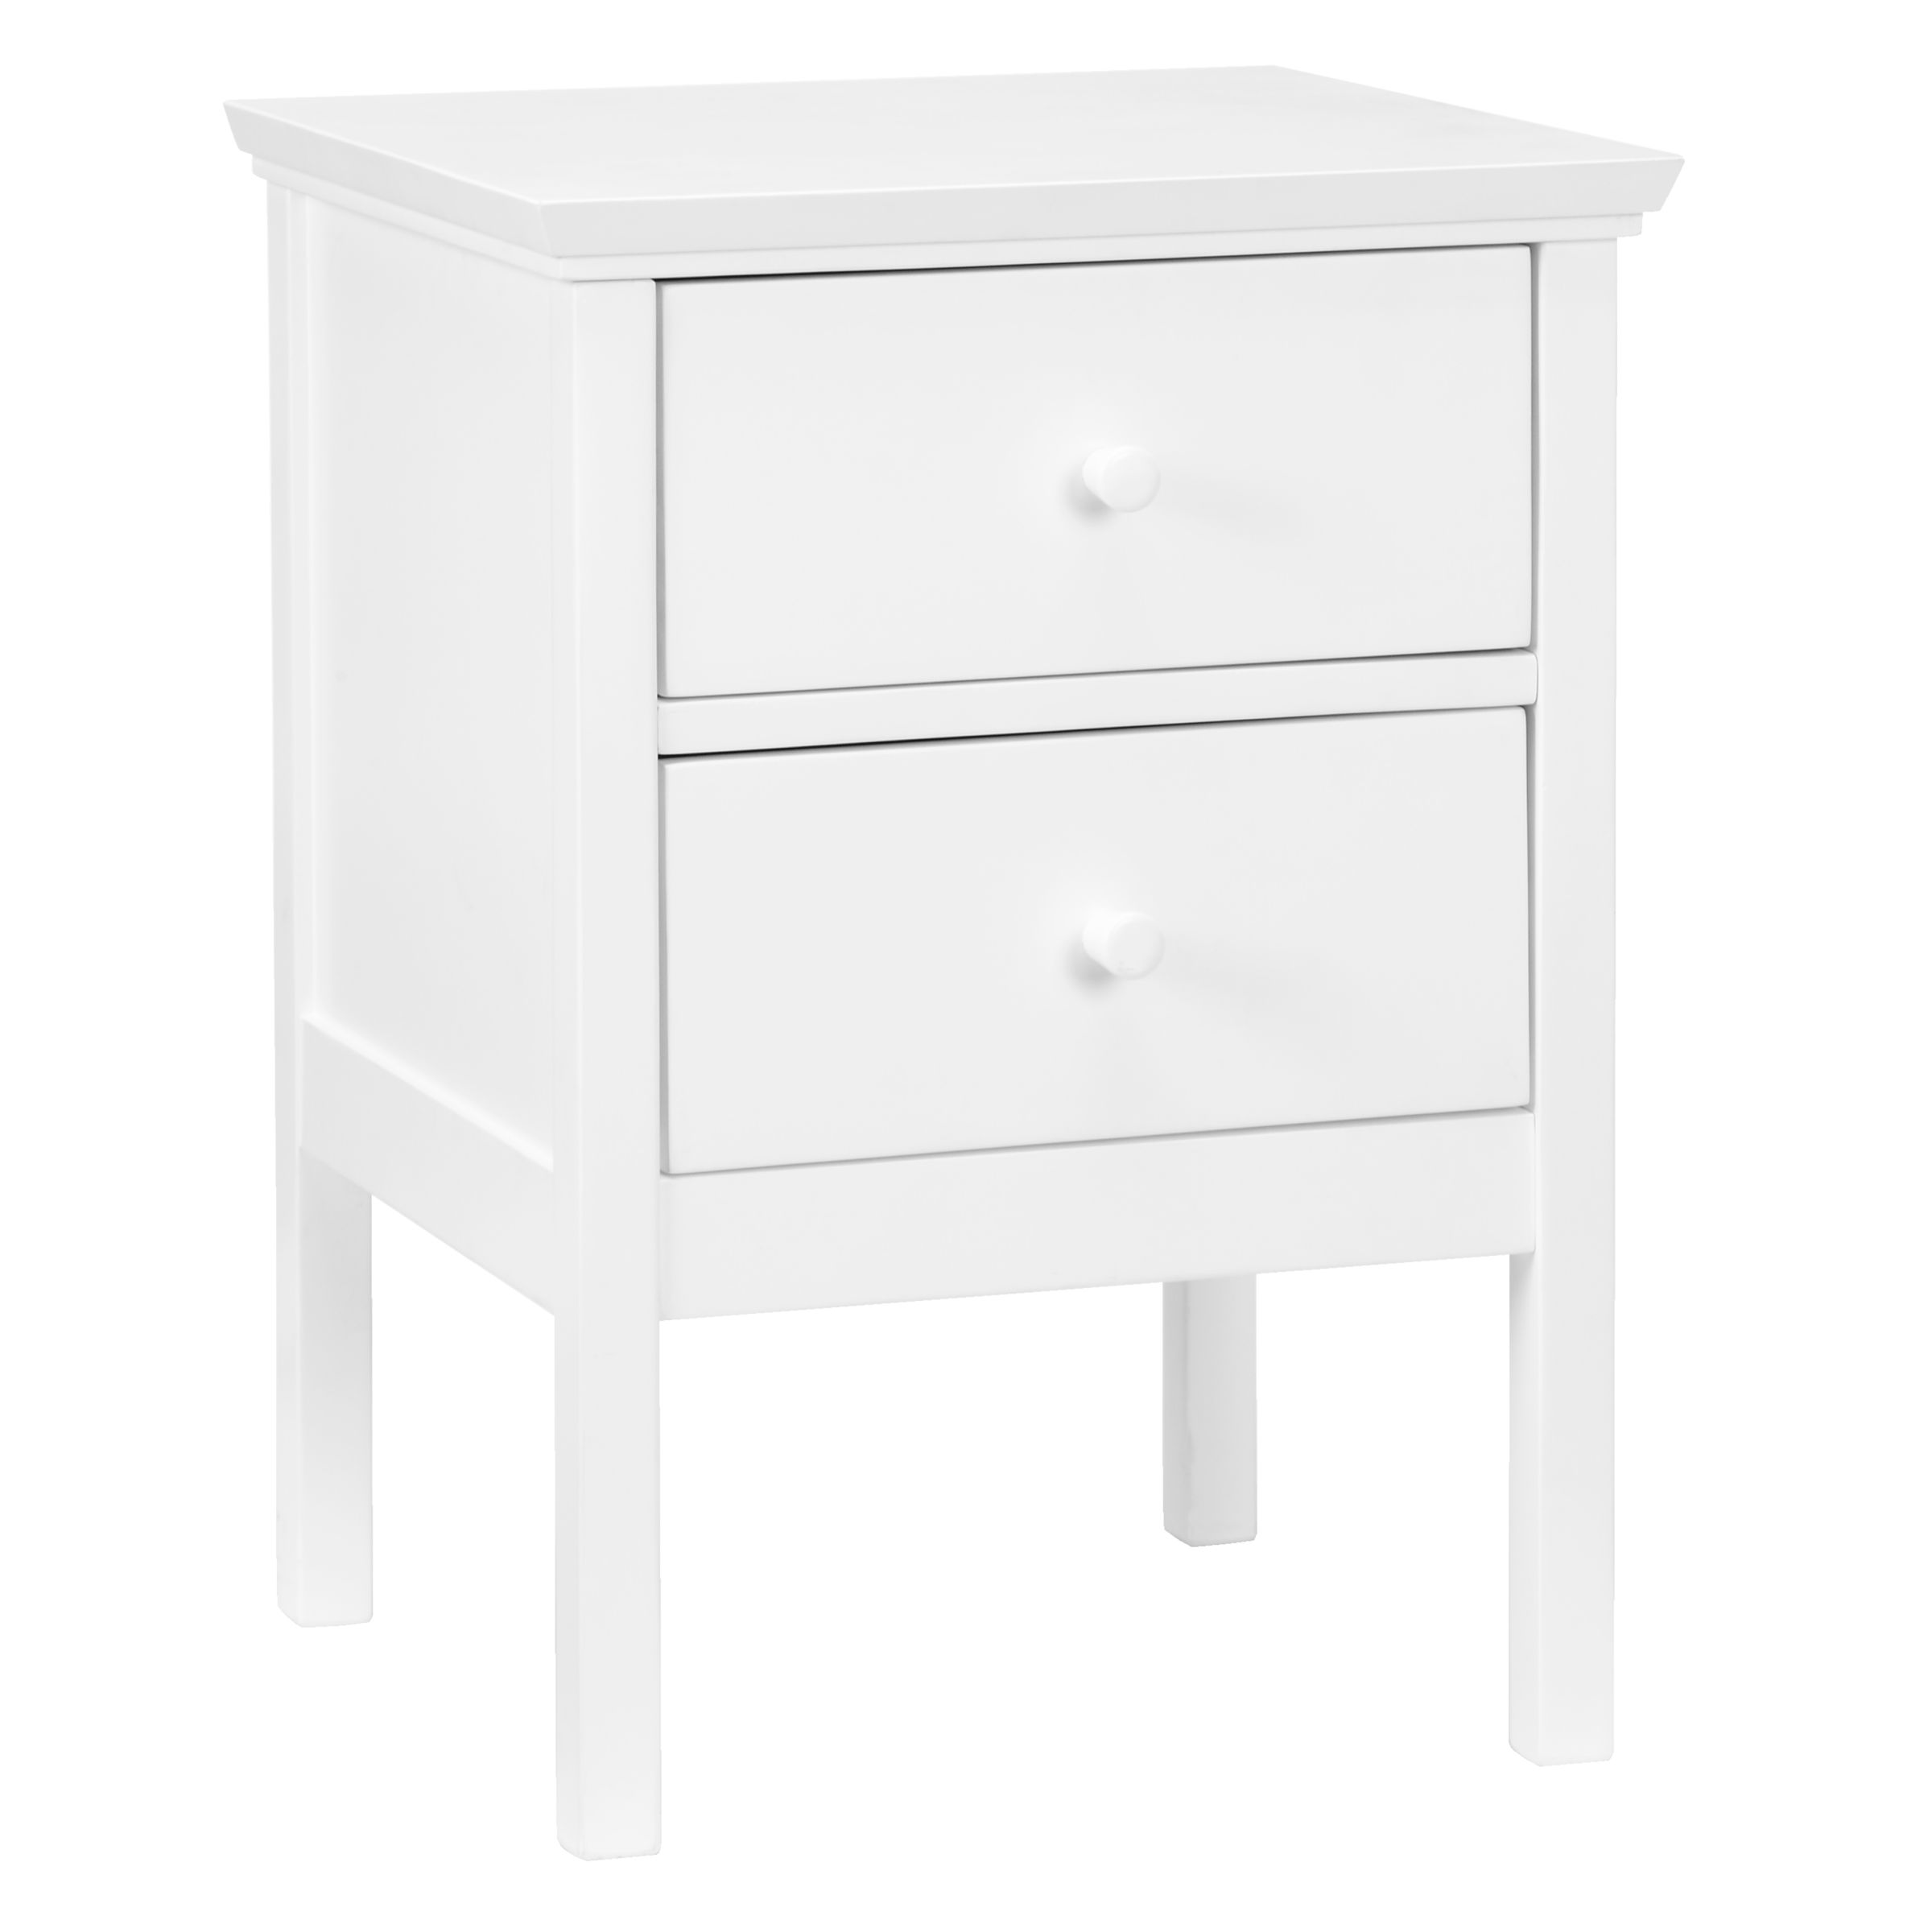 Photo of John lewis anyday wilton 2 drawer bedside cabinet